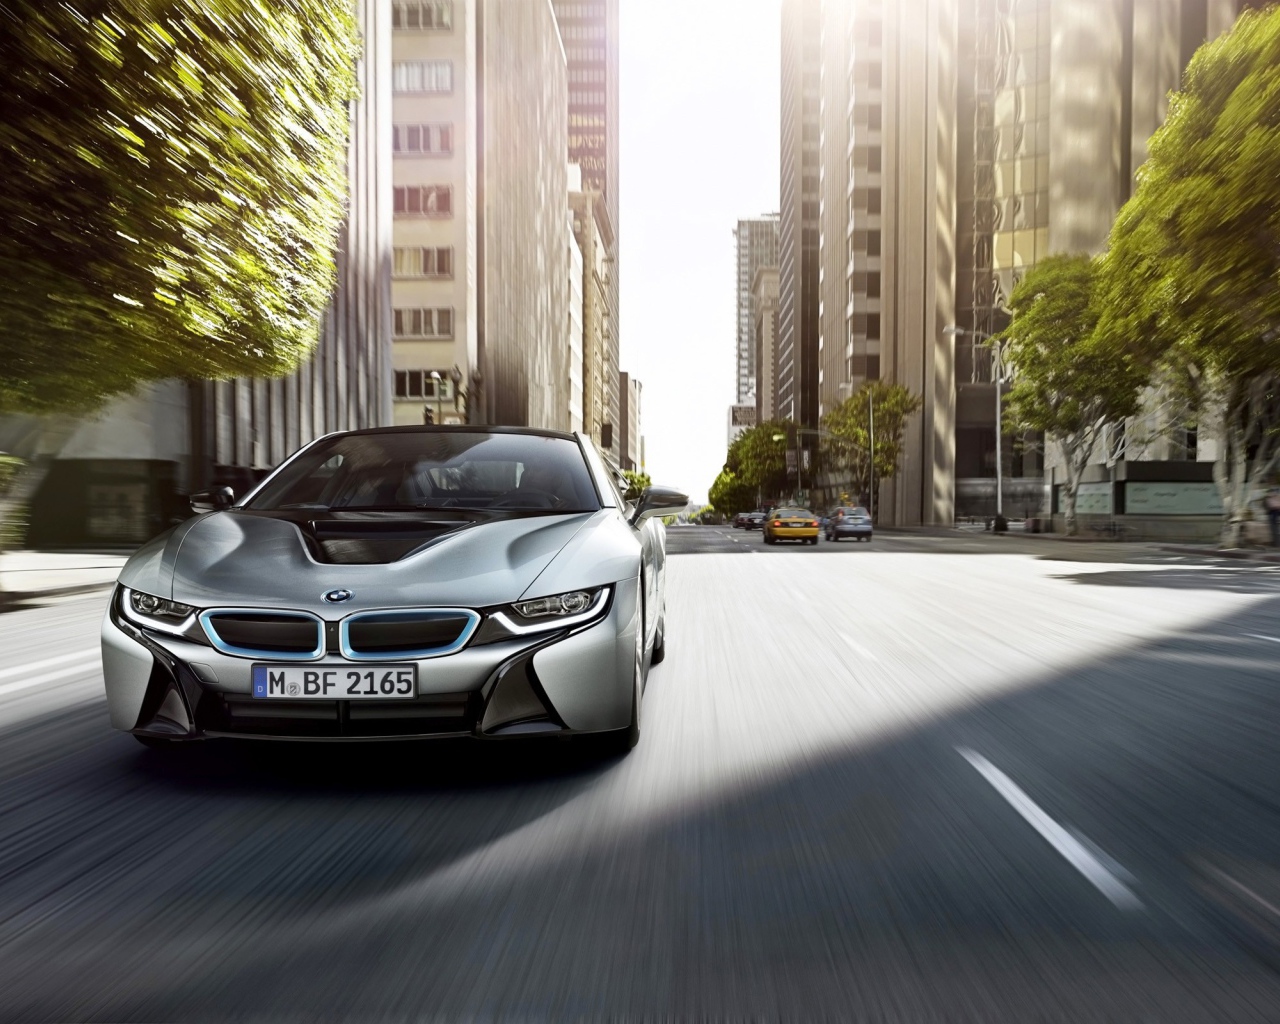 BMW i8 rushing on the street